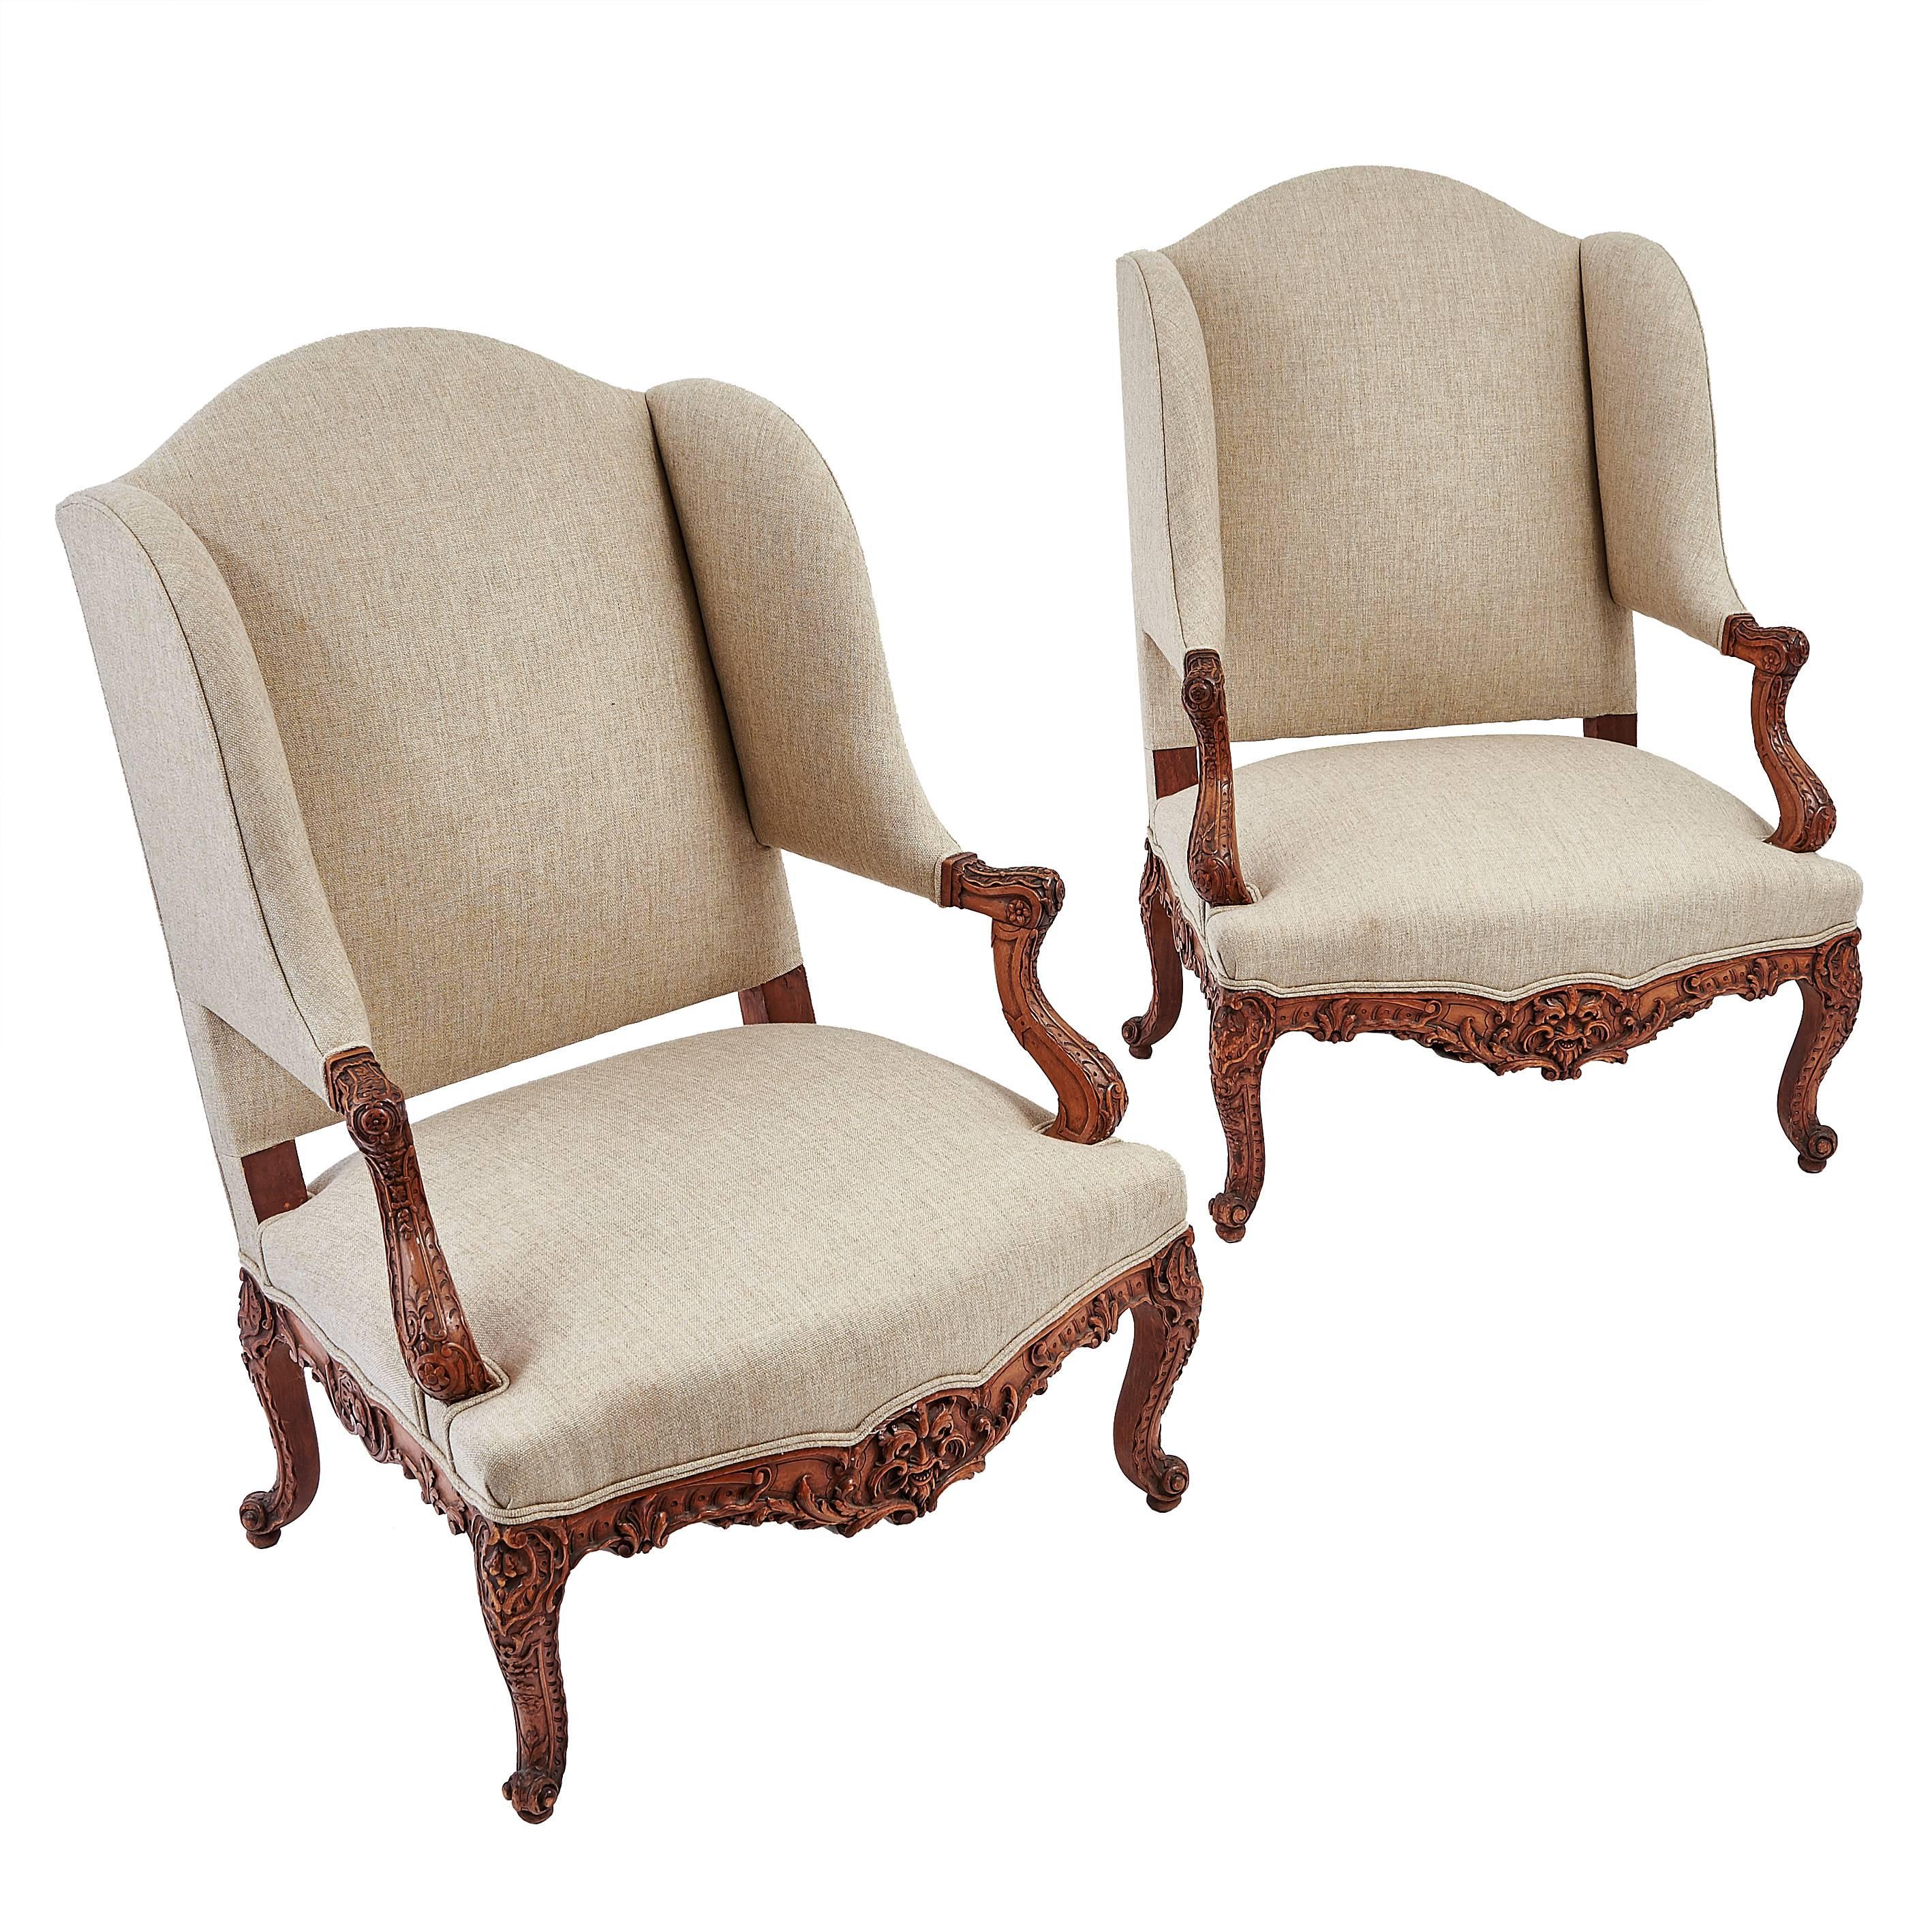 Pair of French Regence Style Wingback Armchairs, circa 1890 For Sale